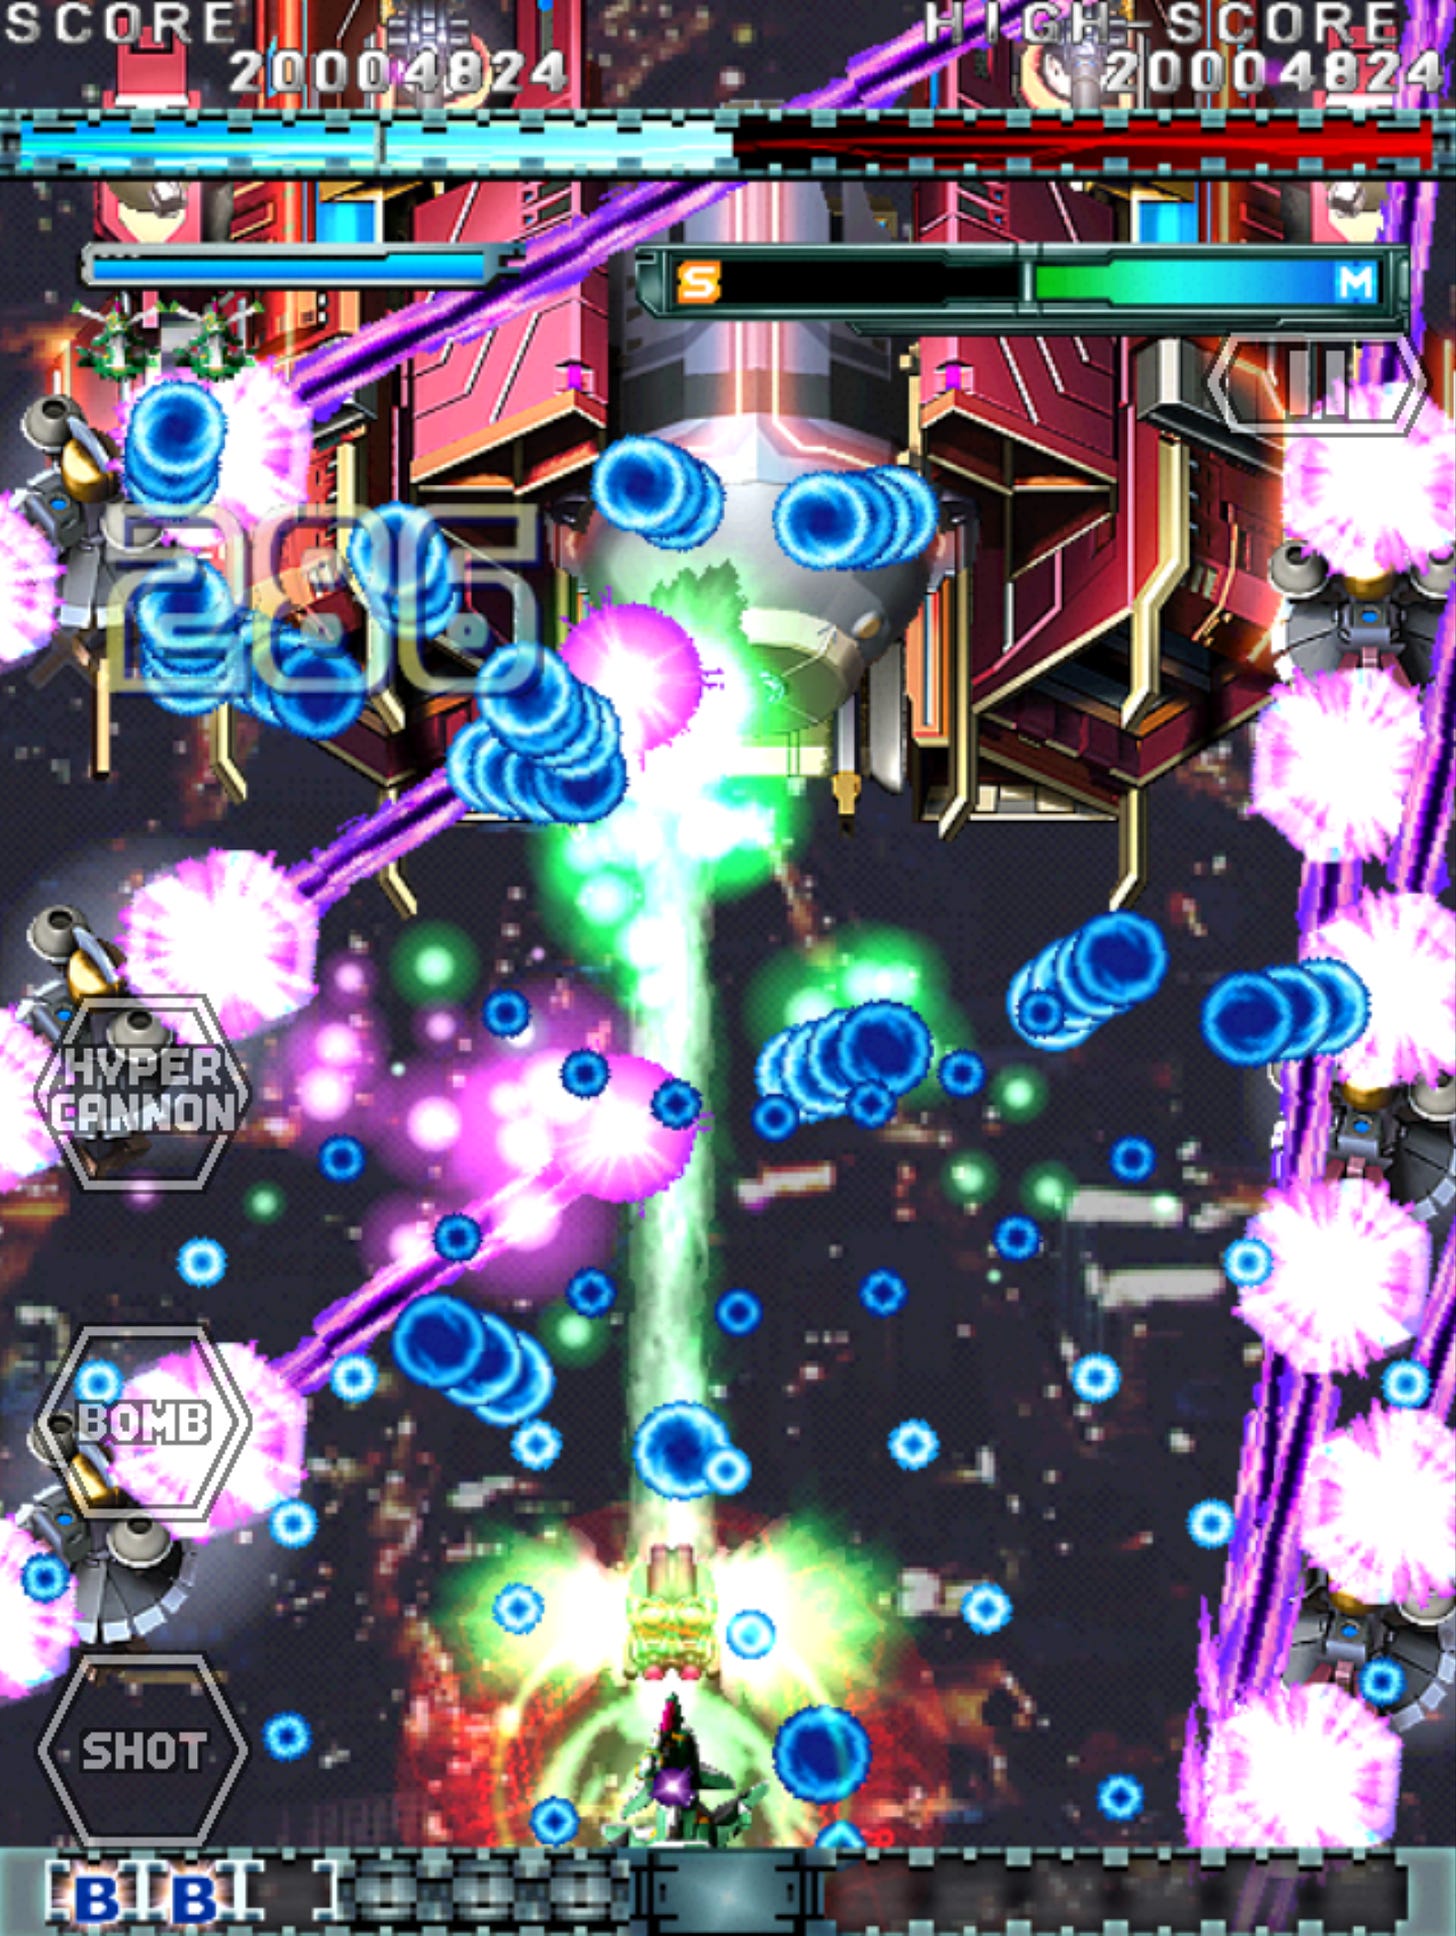 Clouds of blue bullets and webs of lasers fill the screen from a boss